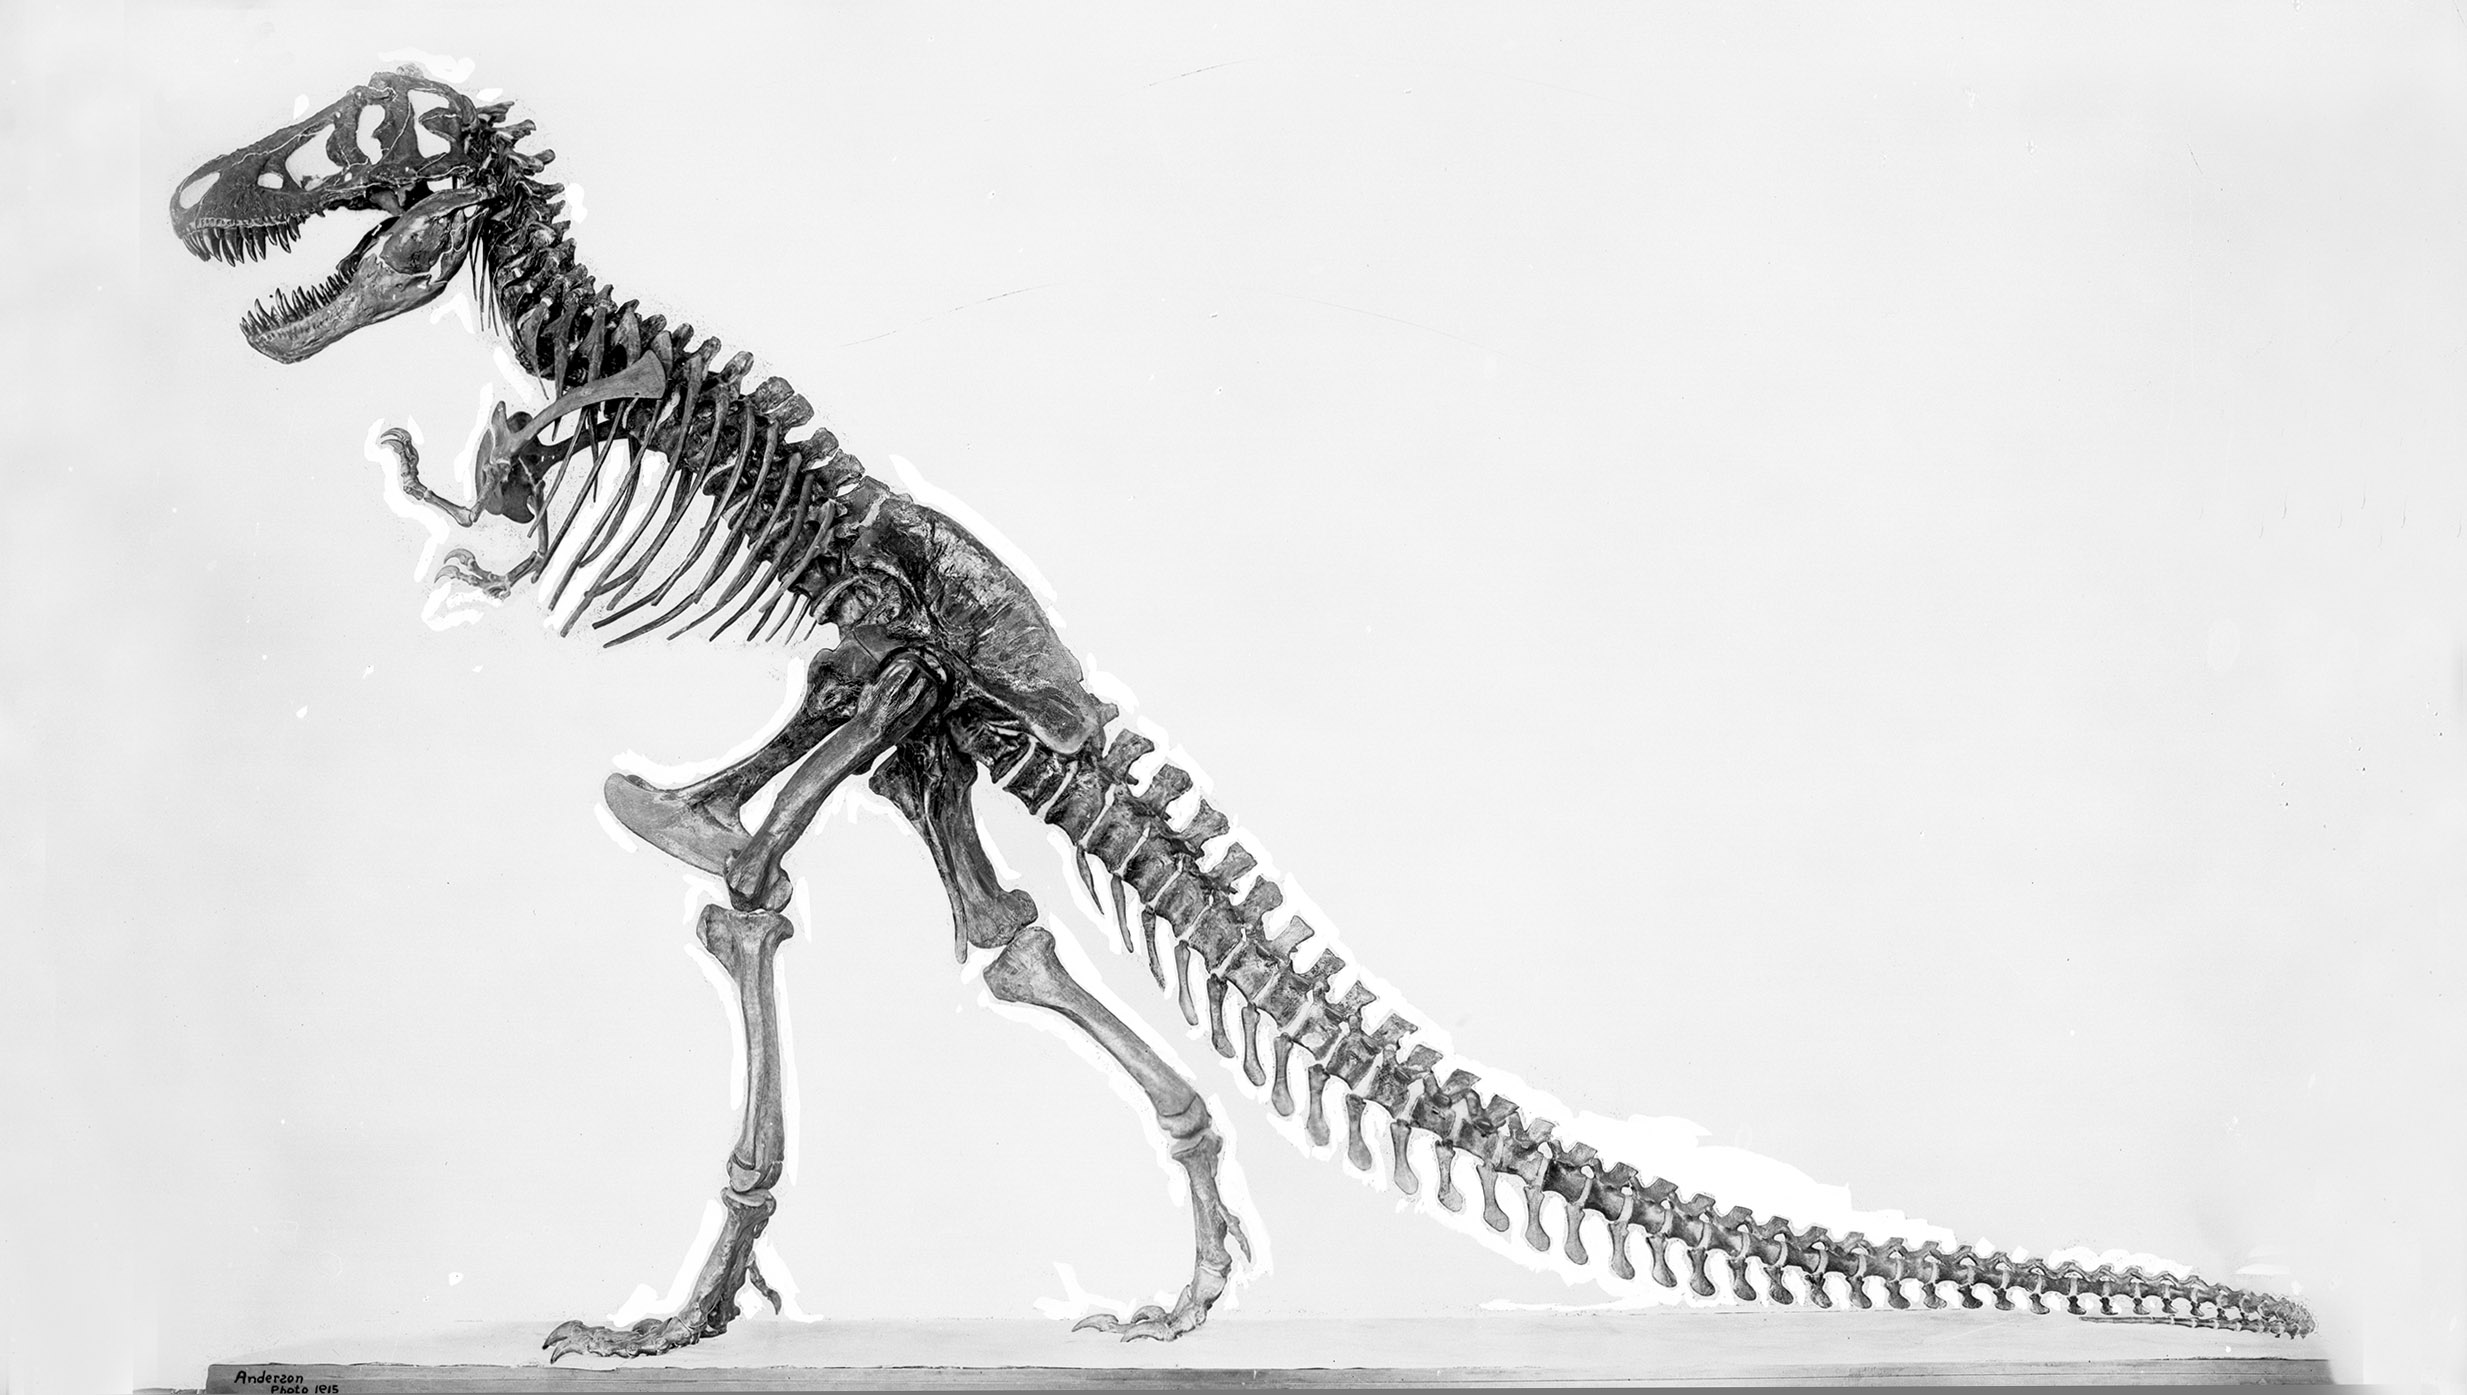 Archival image of T. rex mounted in standing position.